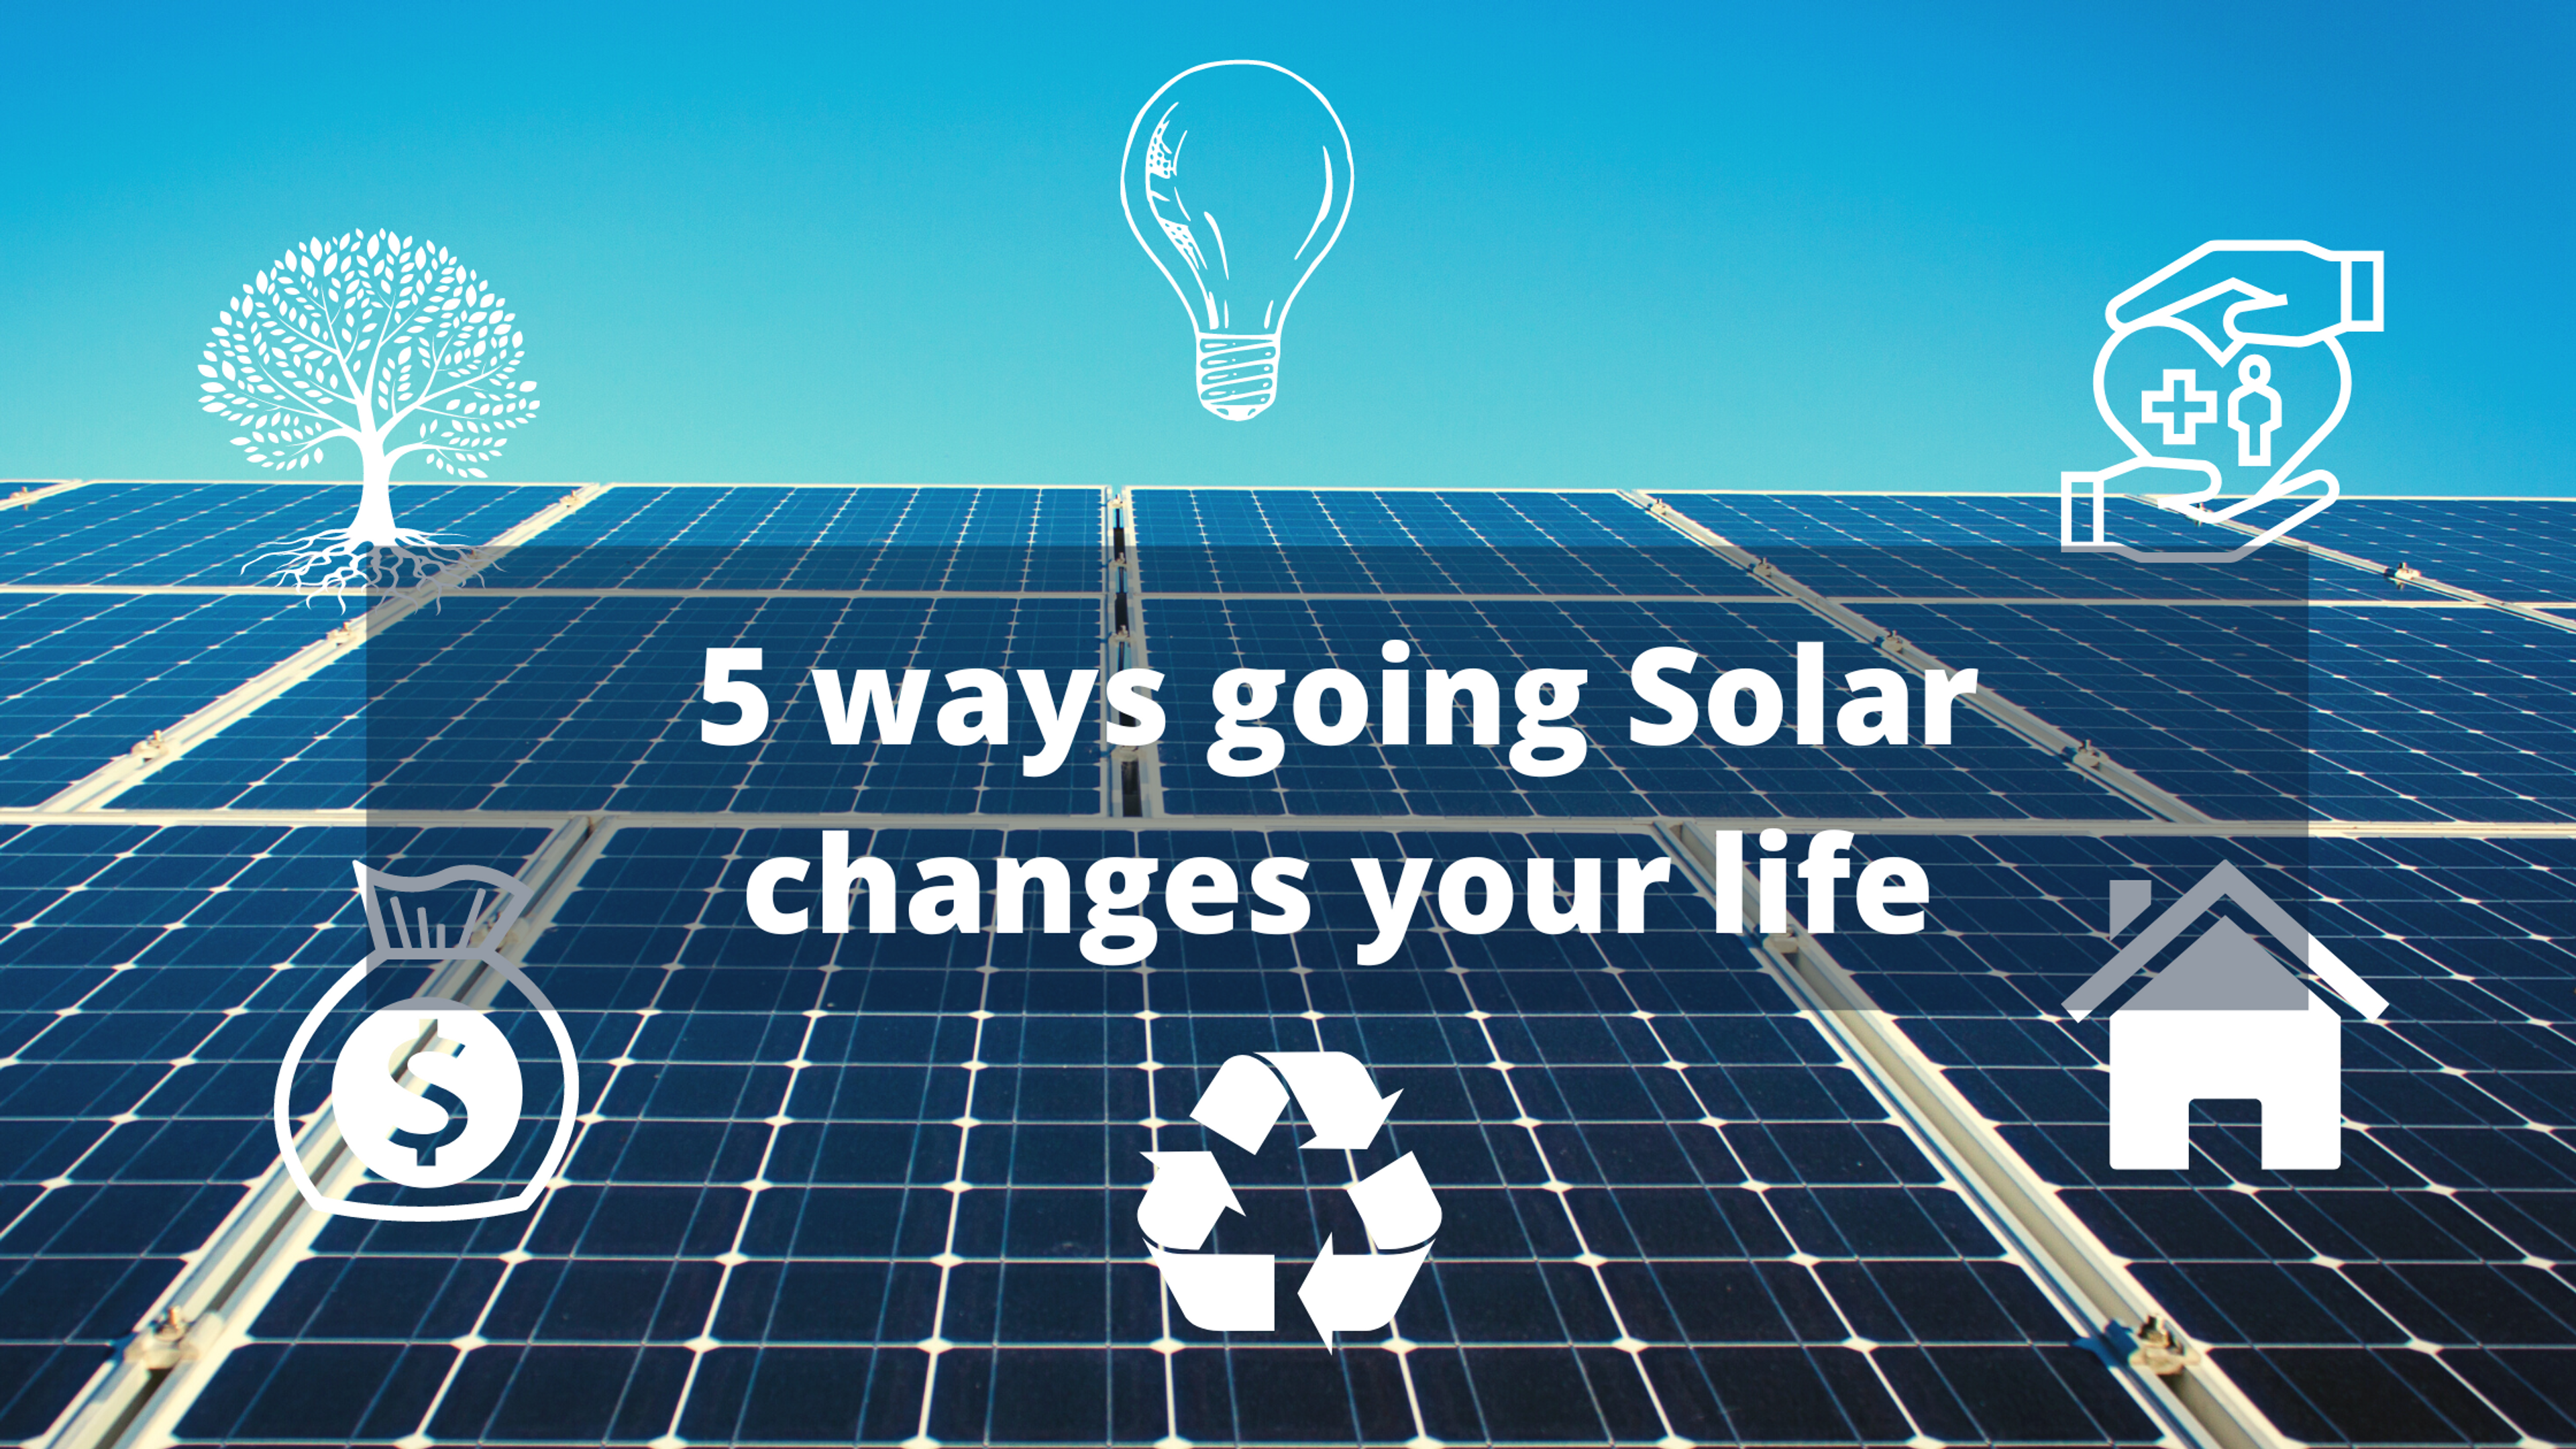 How will solar change my life?